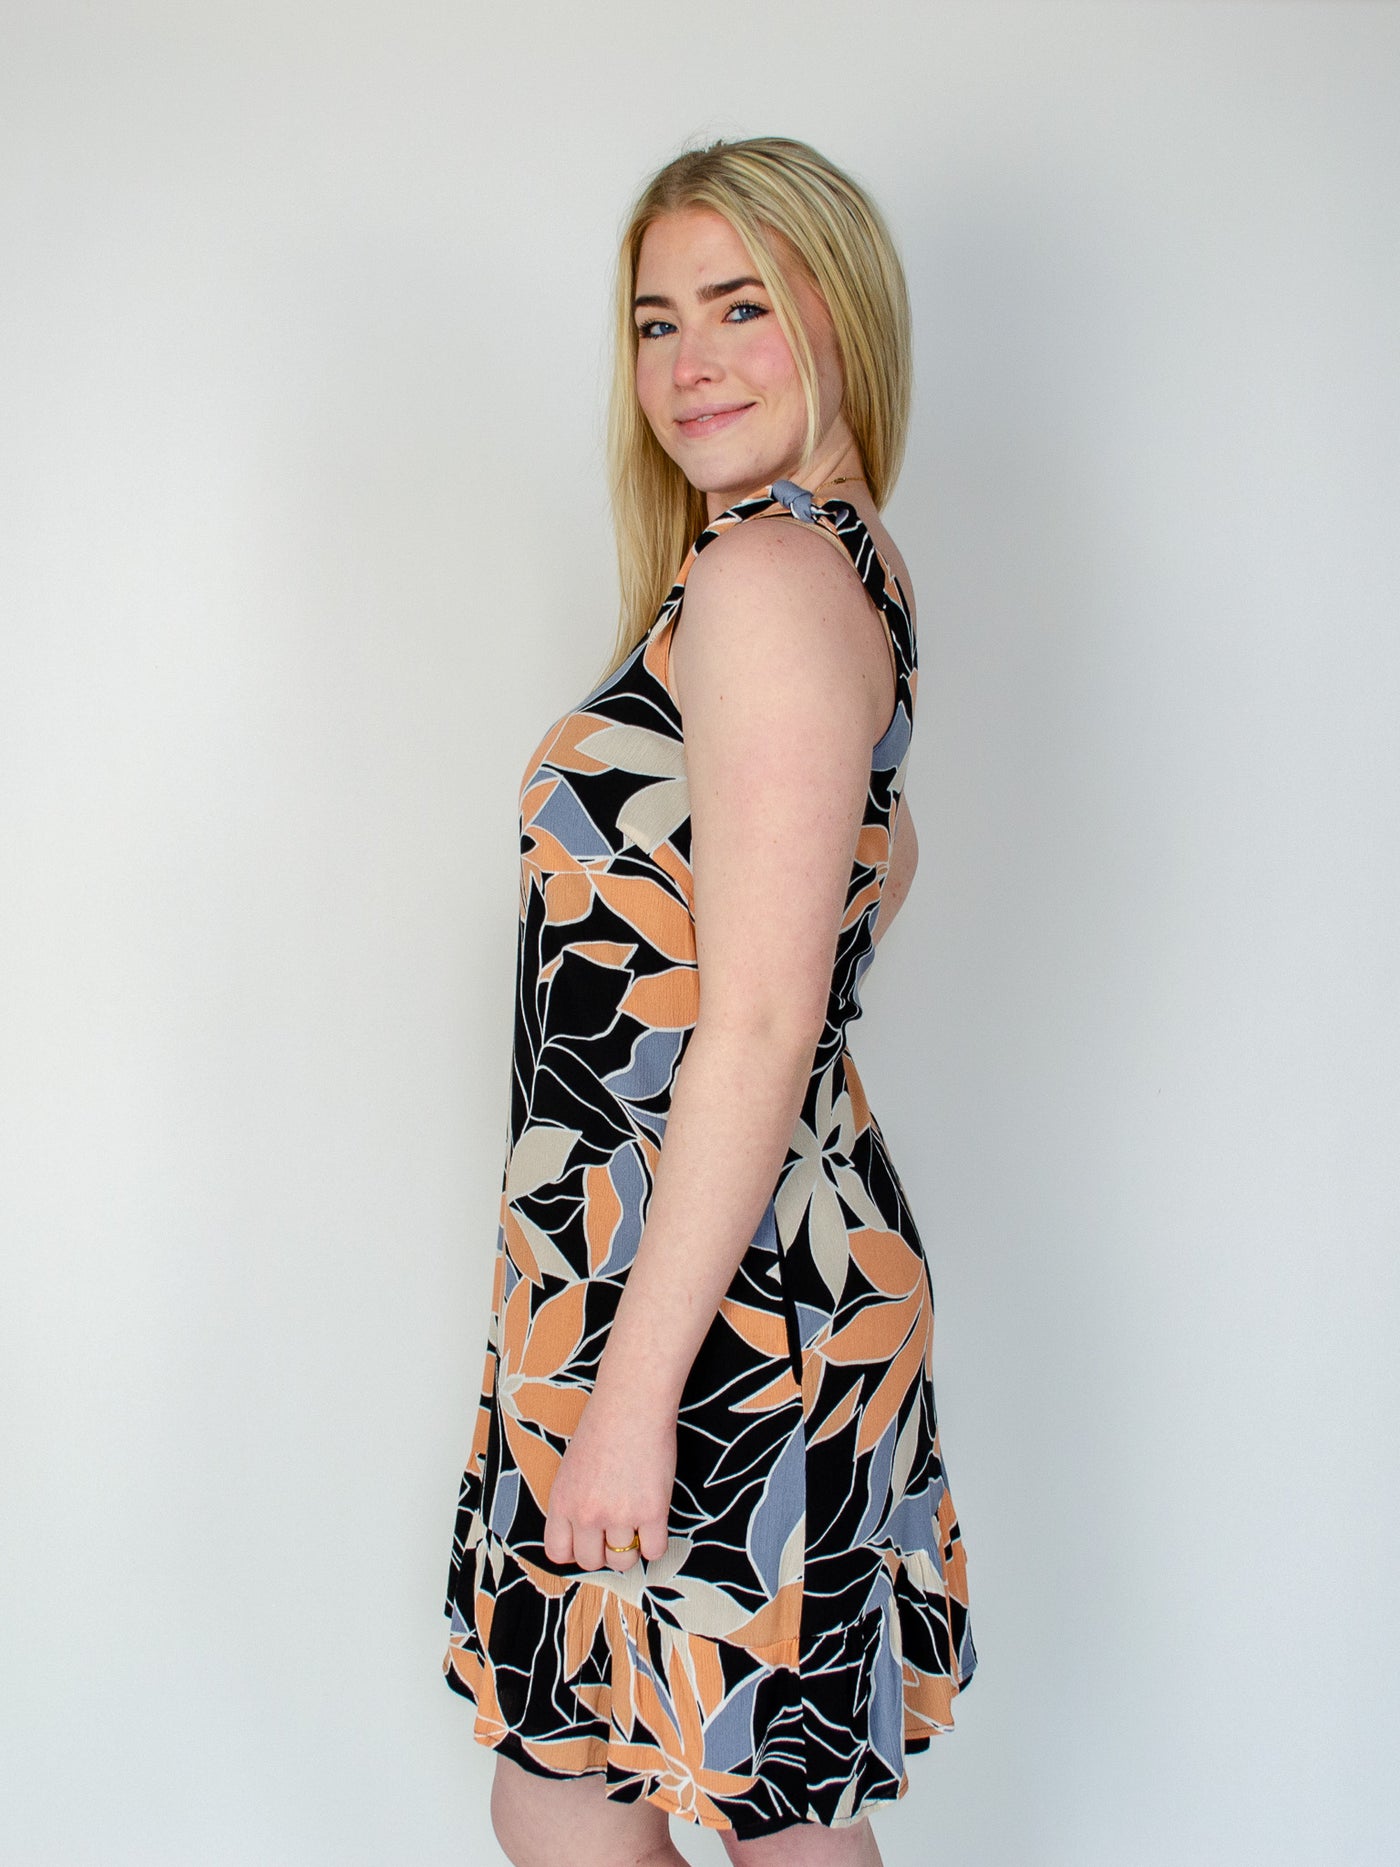 Model is wearing a midi dress with a orange, black, and blue colored floral print. The dress has a tie detail on the straps and is reversible and the other side is all black. Dress is paired with white sneakers. 